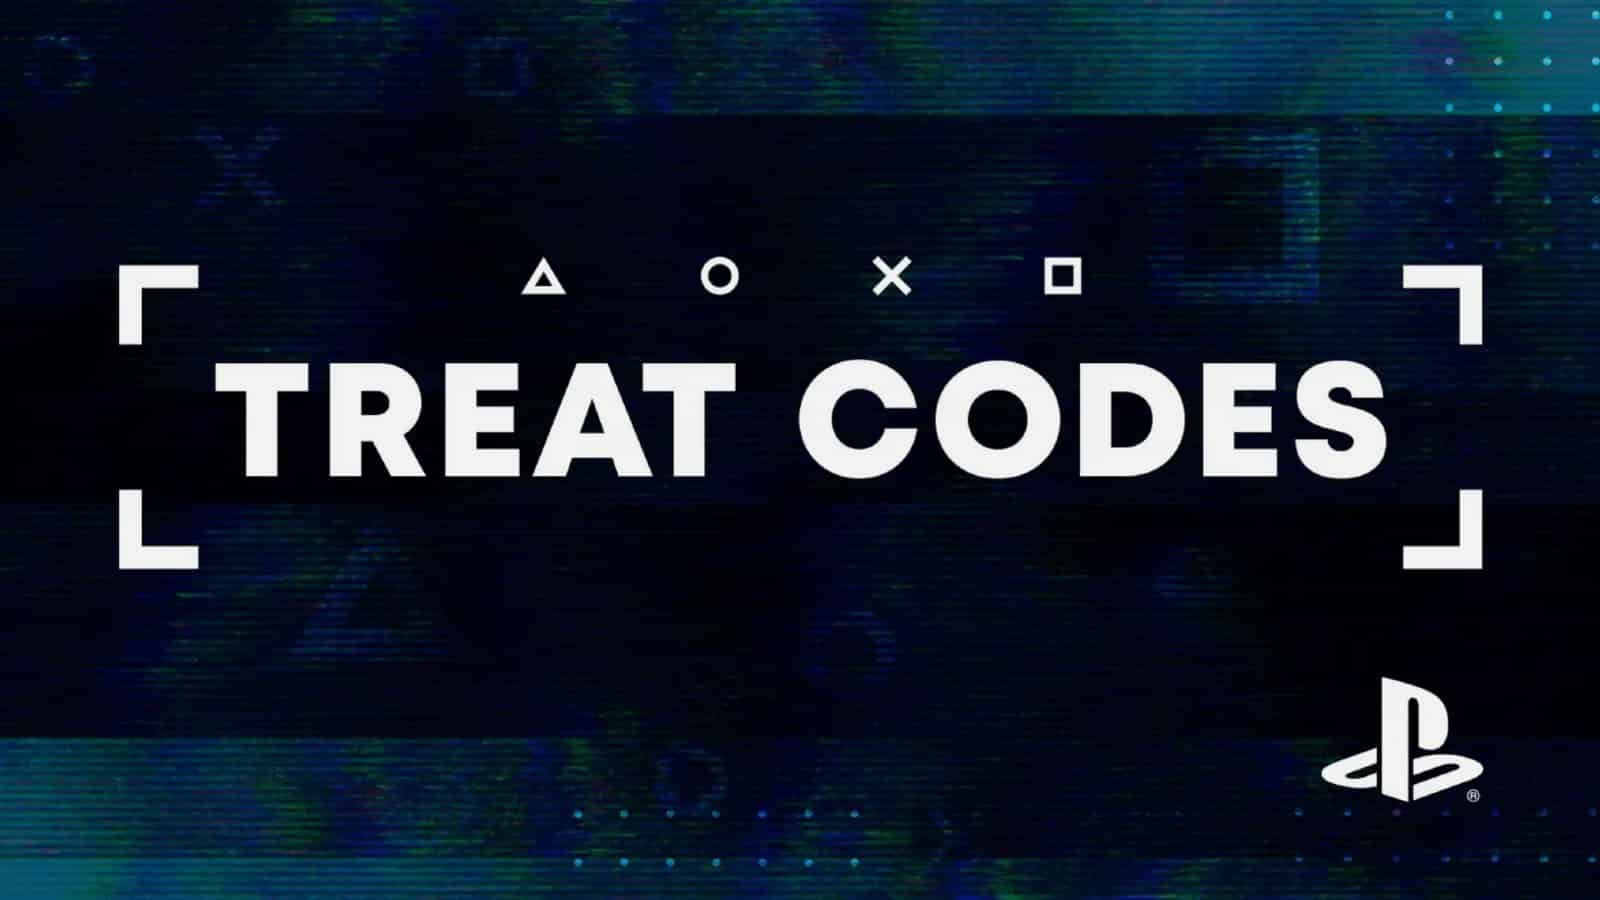 All known PS5 Treat Code event answers